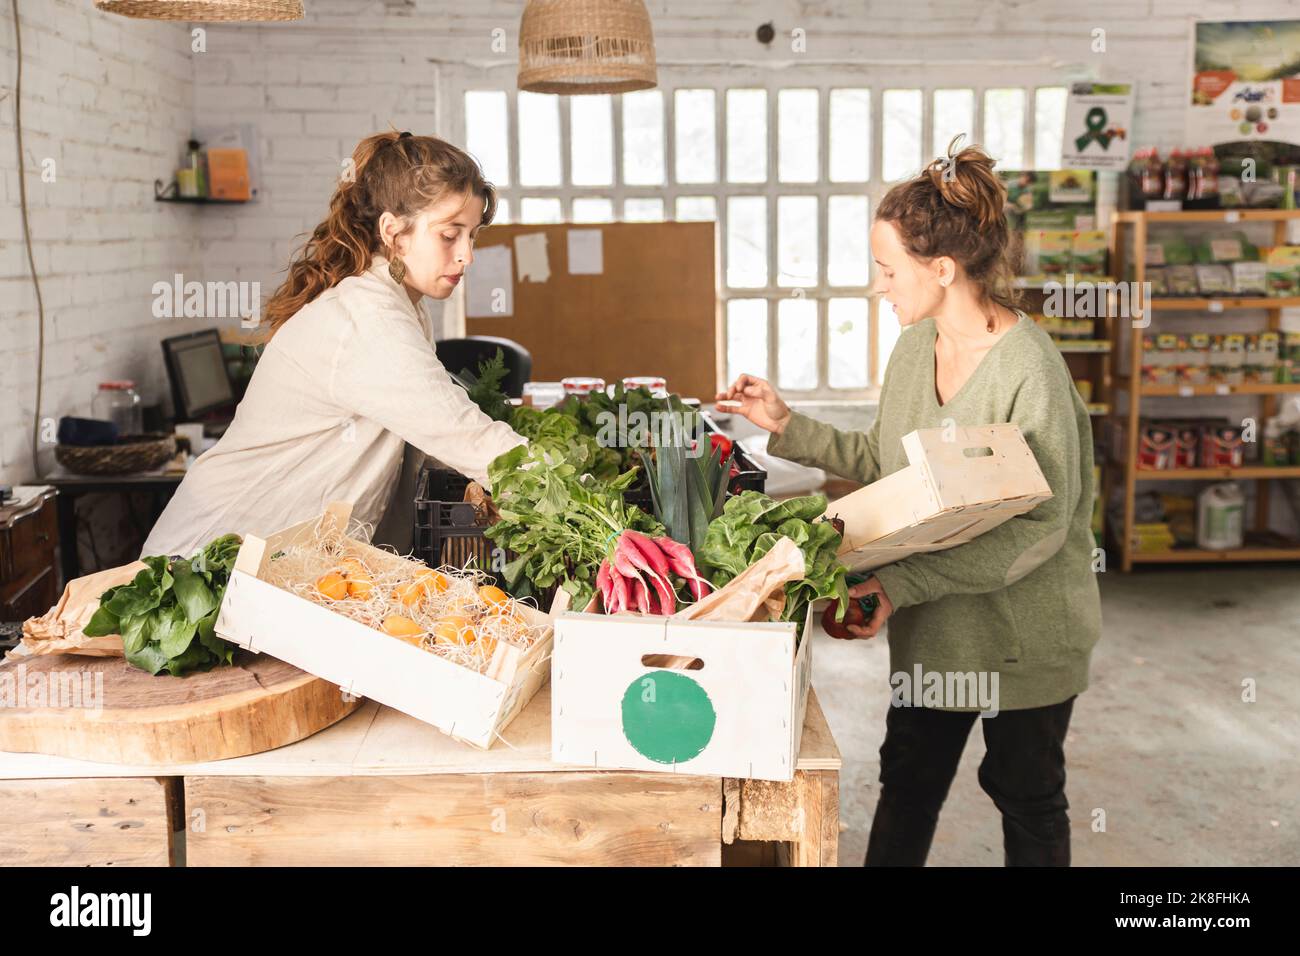 Owner assisting customer buying vegetables in greengrocer shop Stock Photo